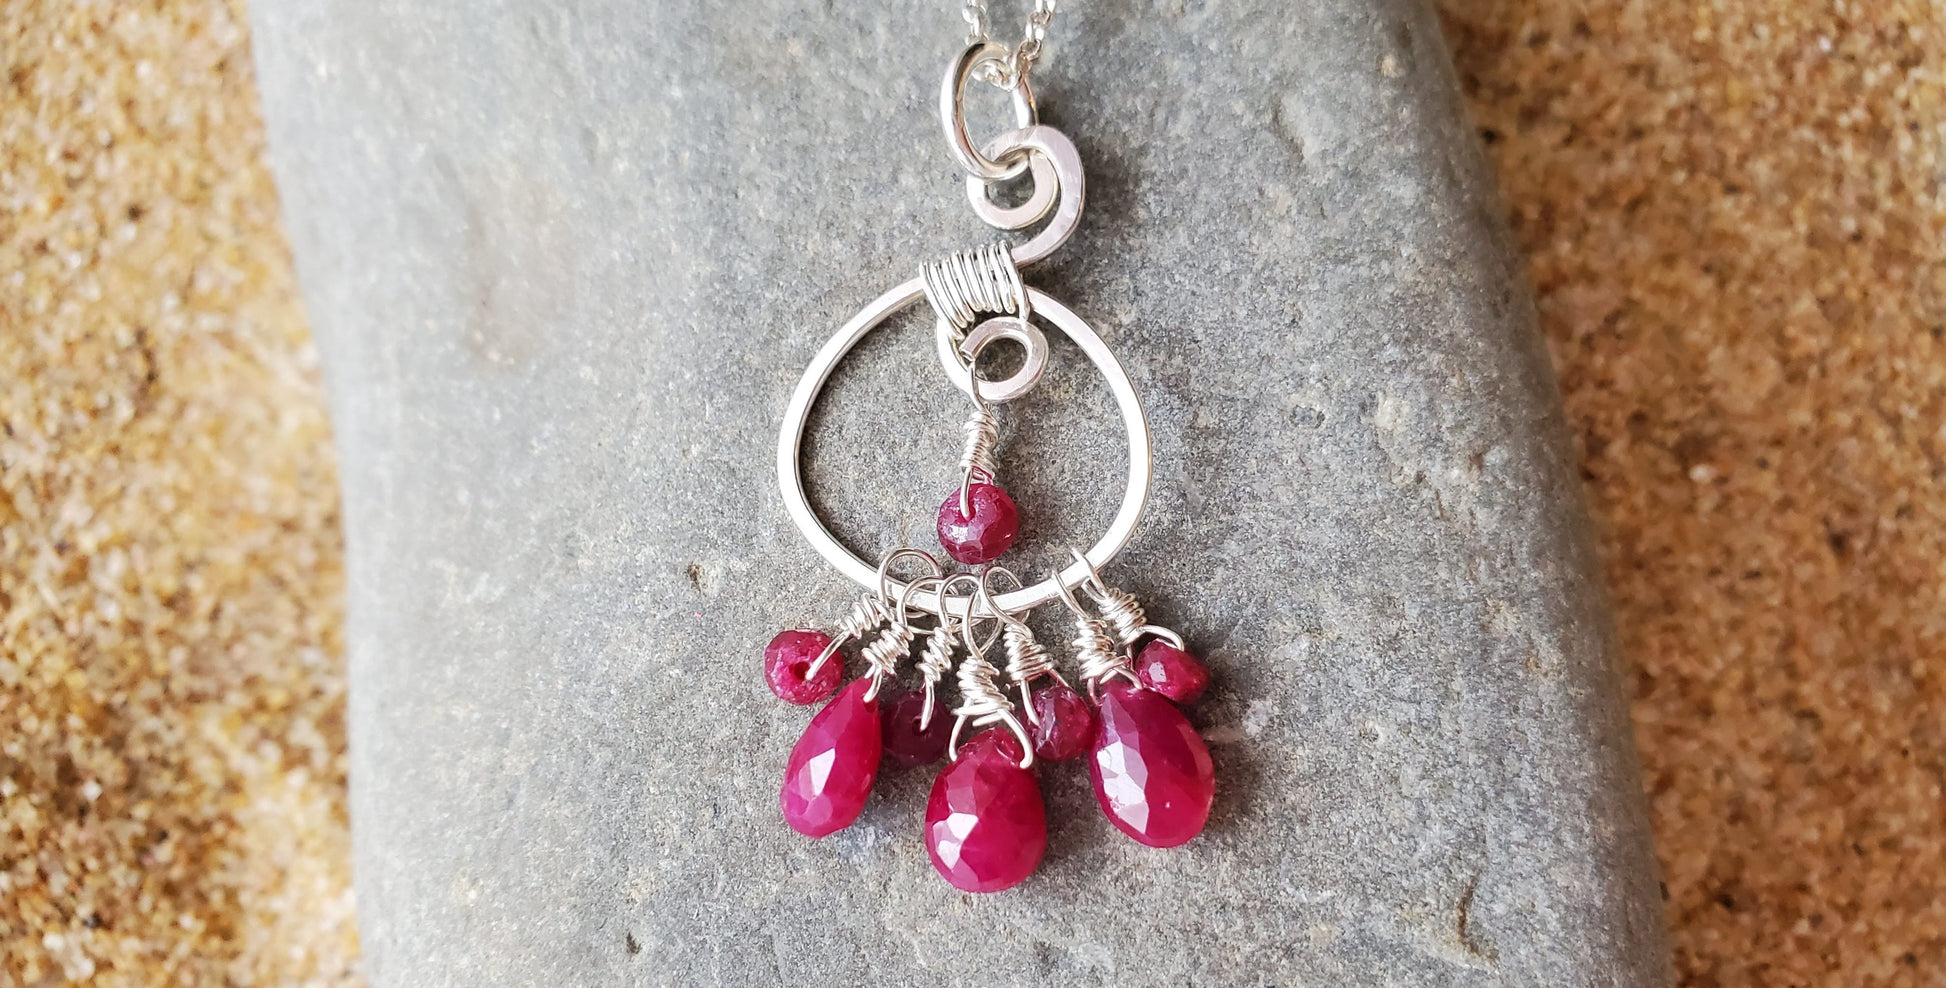 Ruby Bountiful Earth Pendant, Sterling Silver Pendant, Celtic Design with Cluster of Dangling Rubies